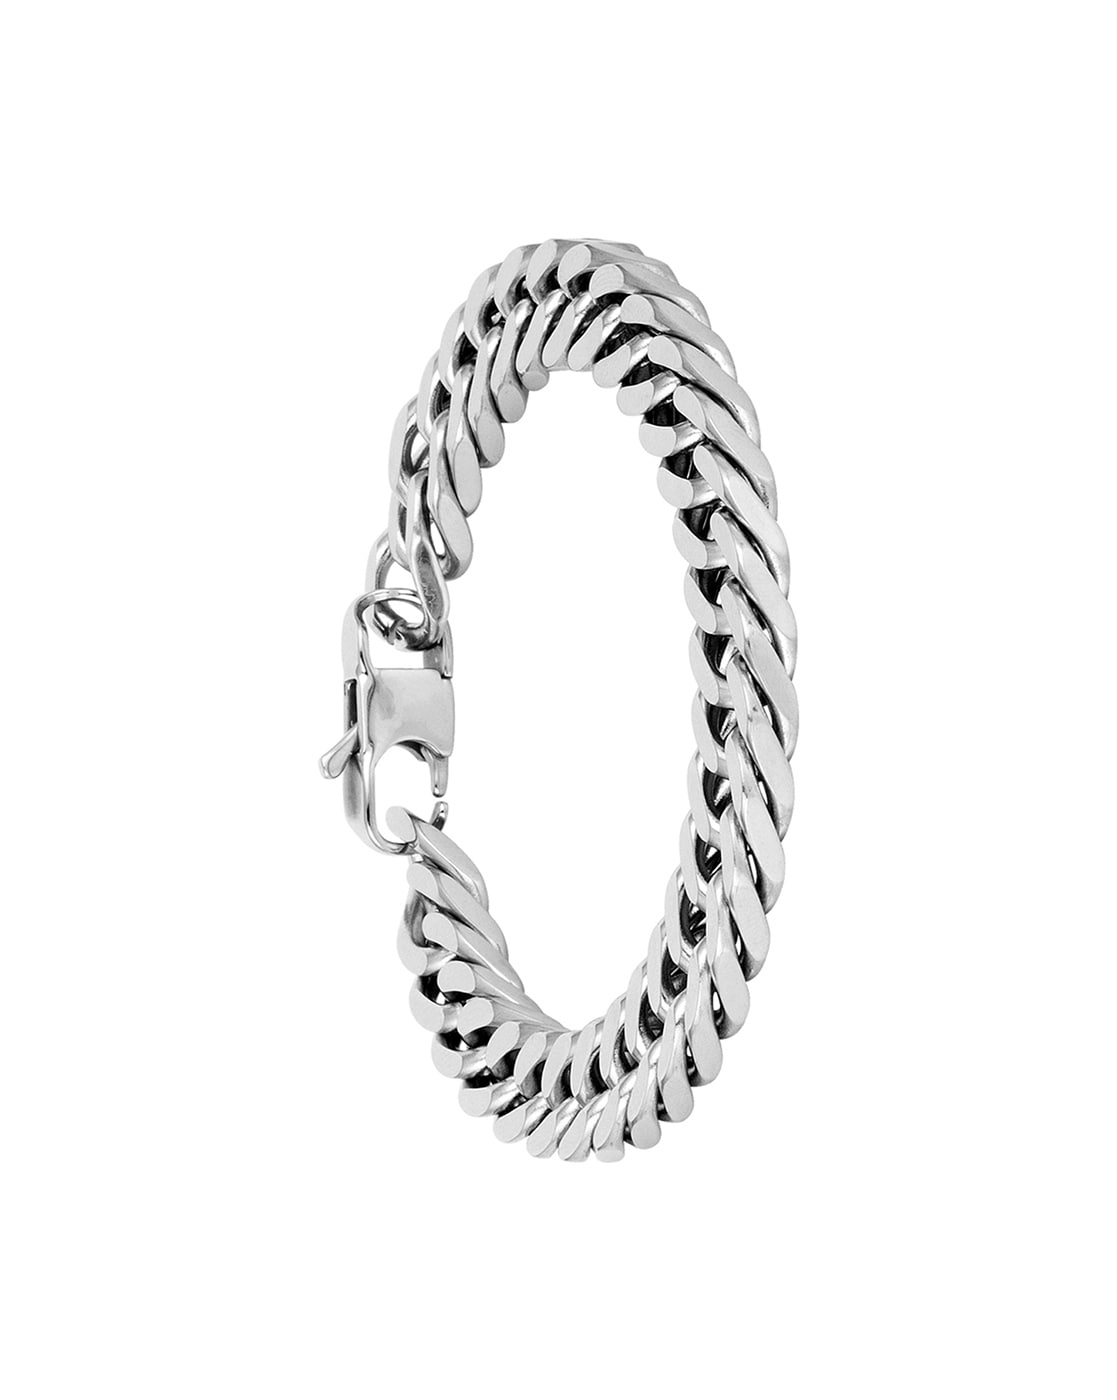 Peora Silver Toned Alloy Plated Wraparound Bracelet 9735563htm  Buy Peora  Silver Toned Alloy Plated Wraparound Bracelet 9735563htm online in India